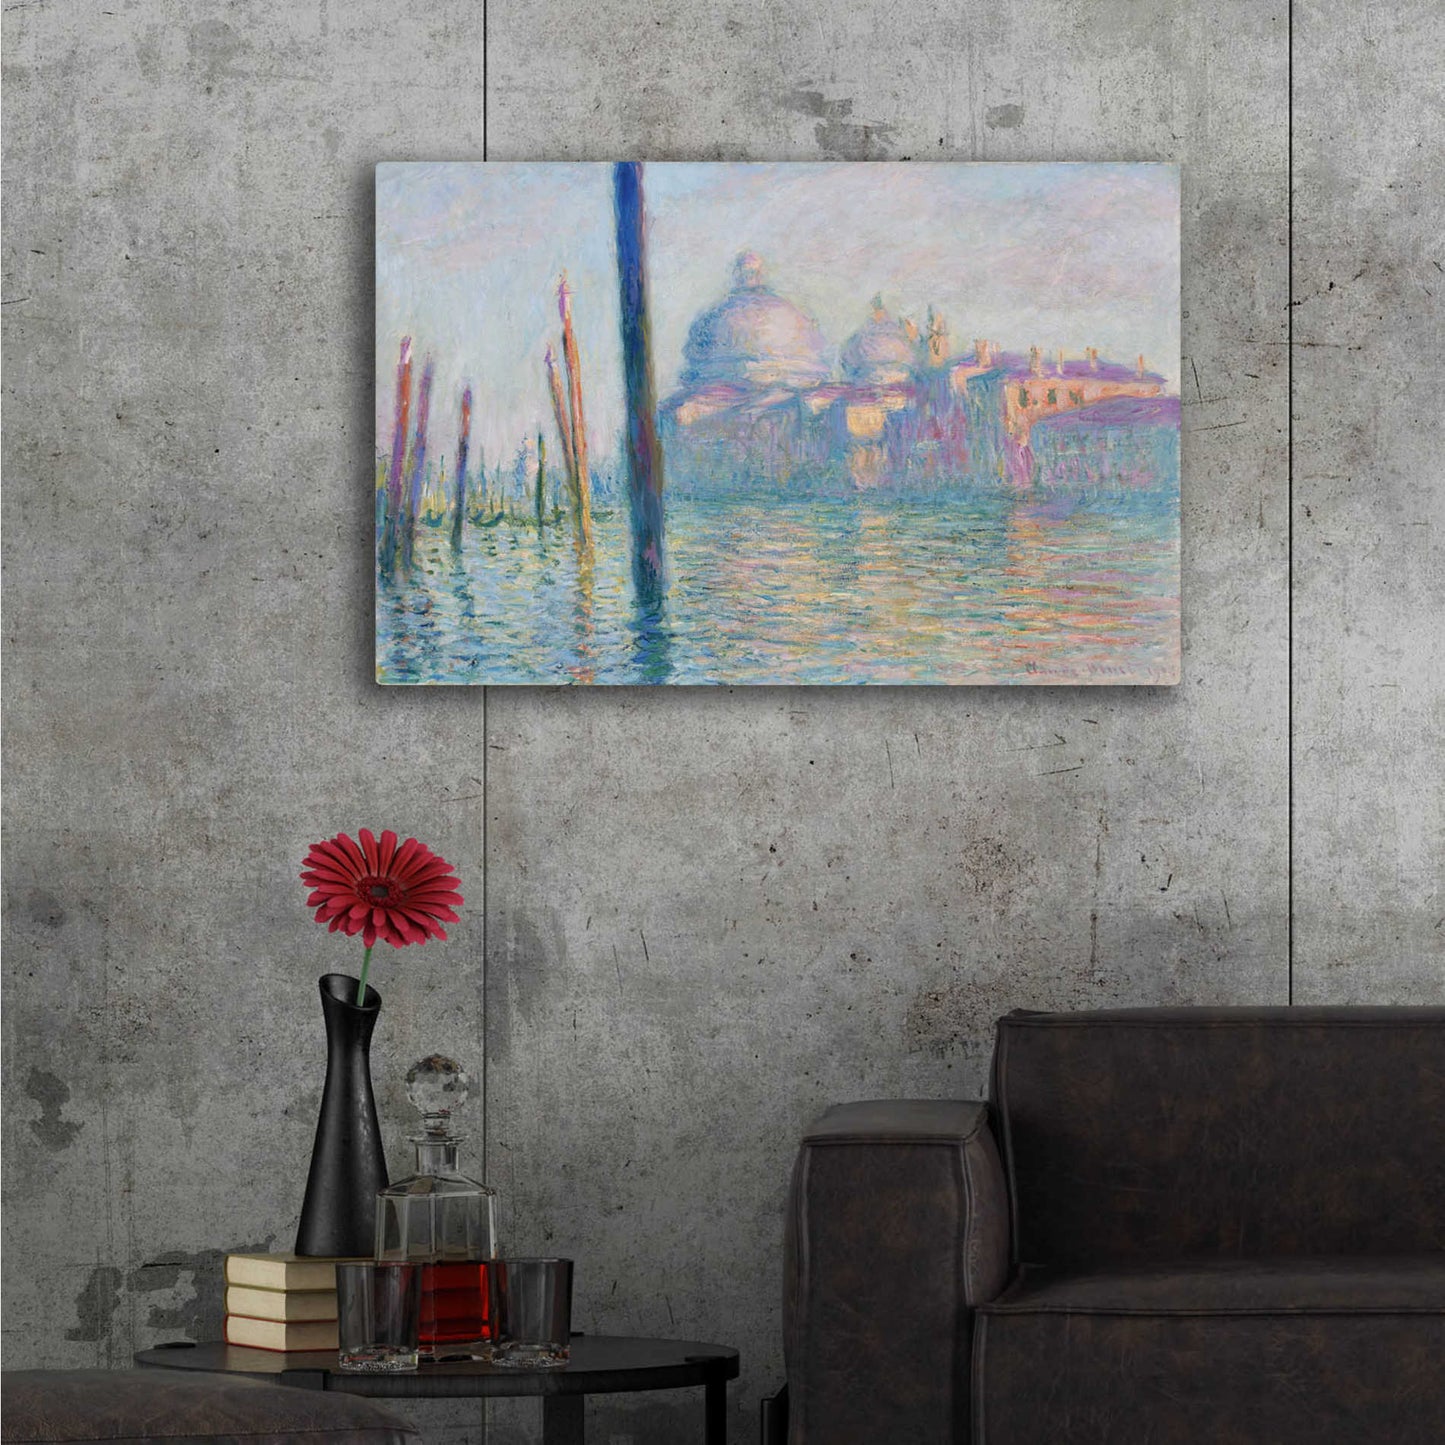 Epic Art 'Le Grand Canal' by Claude Monet, Acrylic Glass Wall Art,36x24